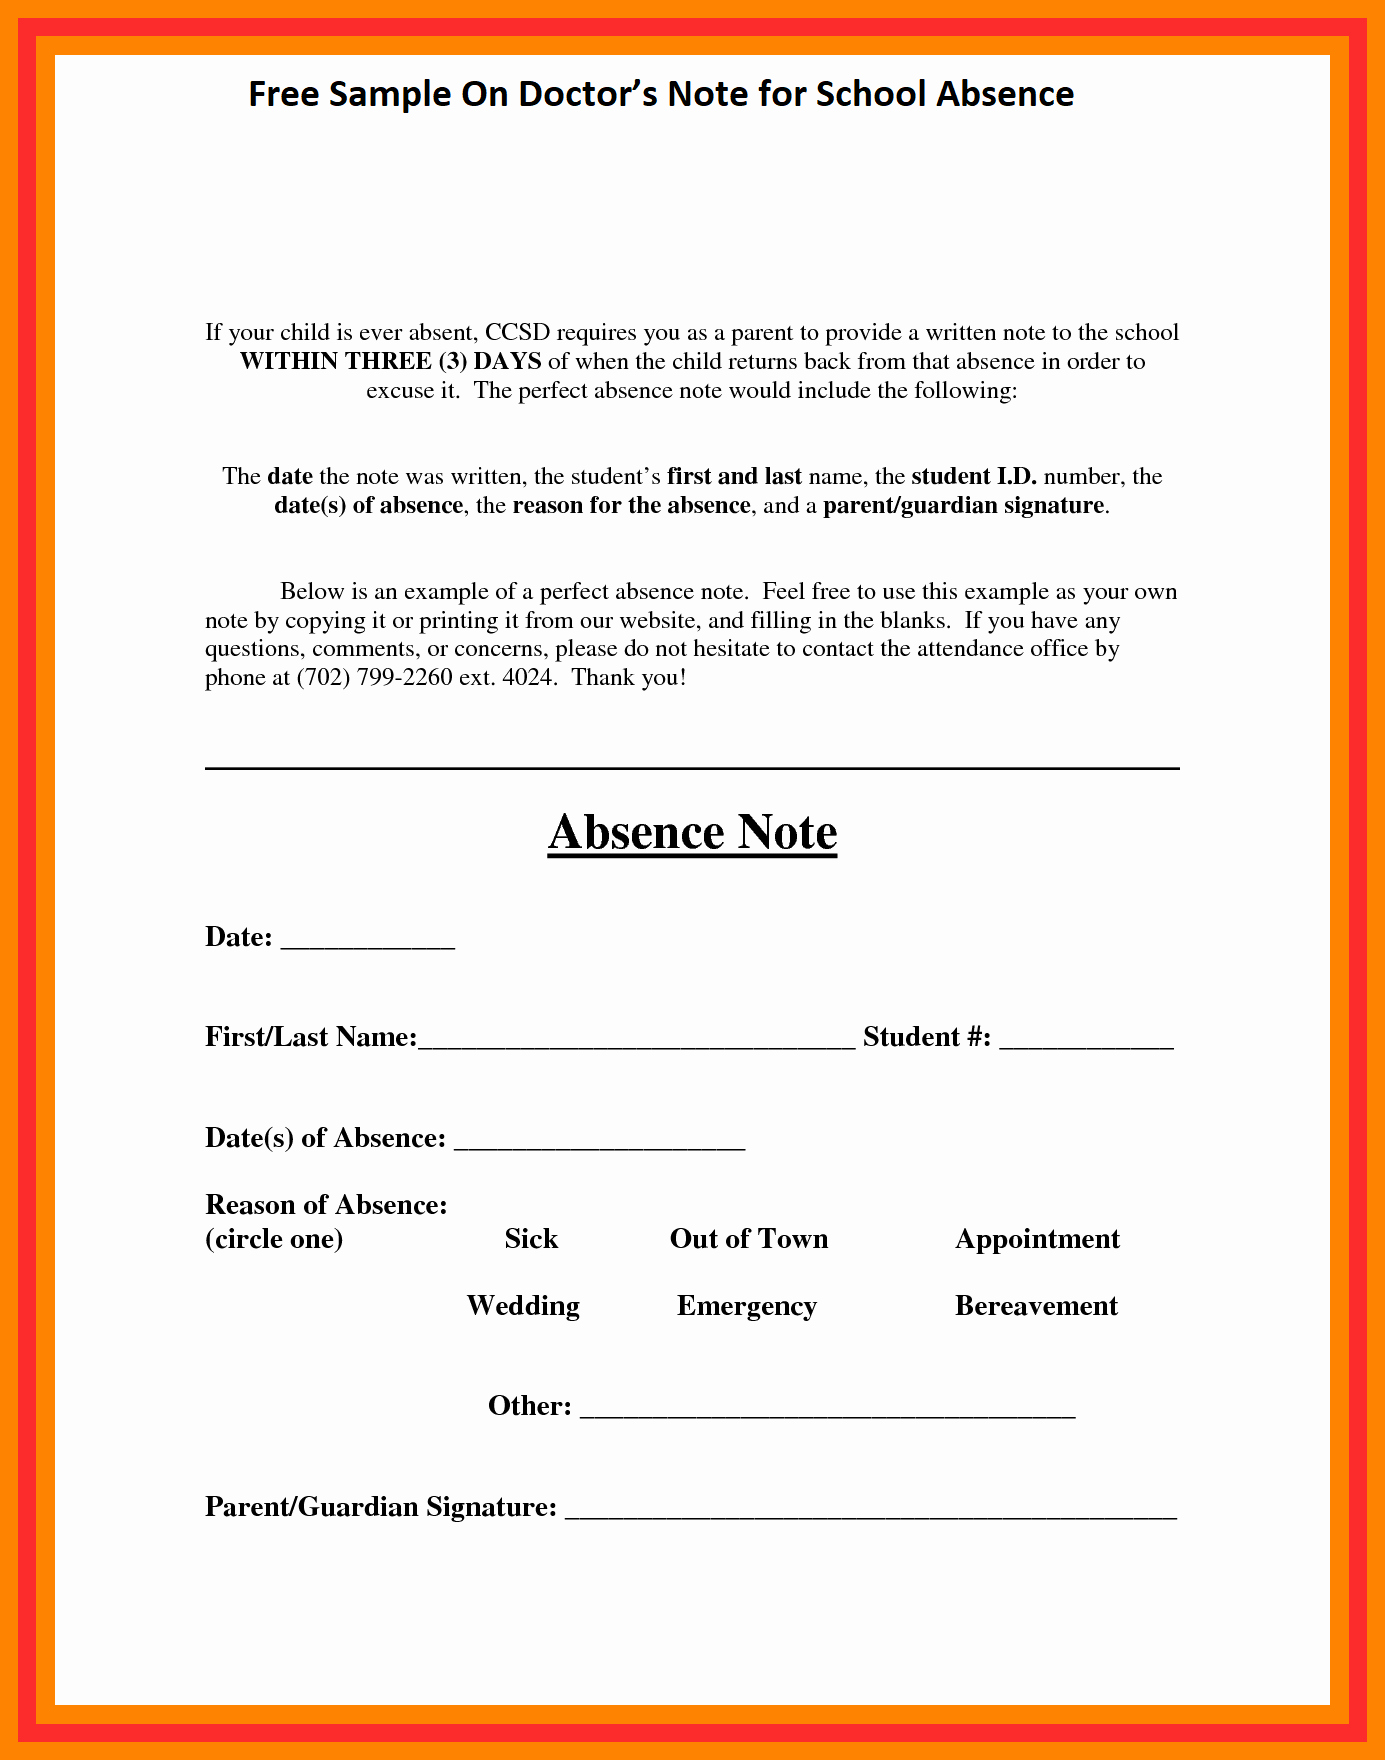 Dental Excuse Letter Template New Free Sample Doctor S Note for School Absence